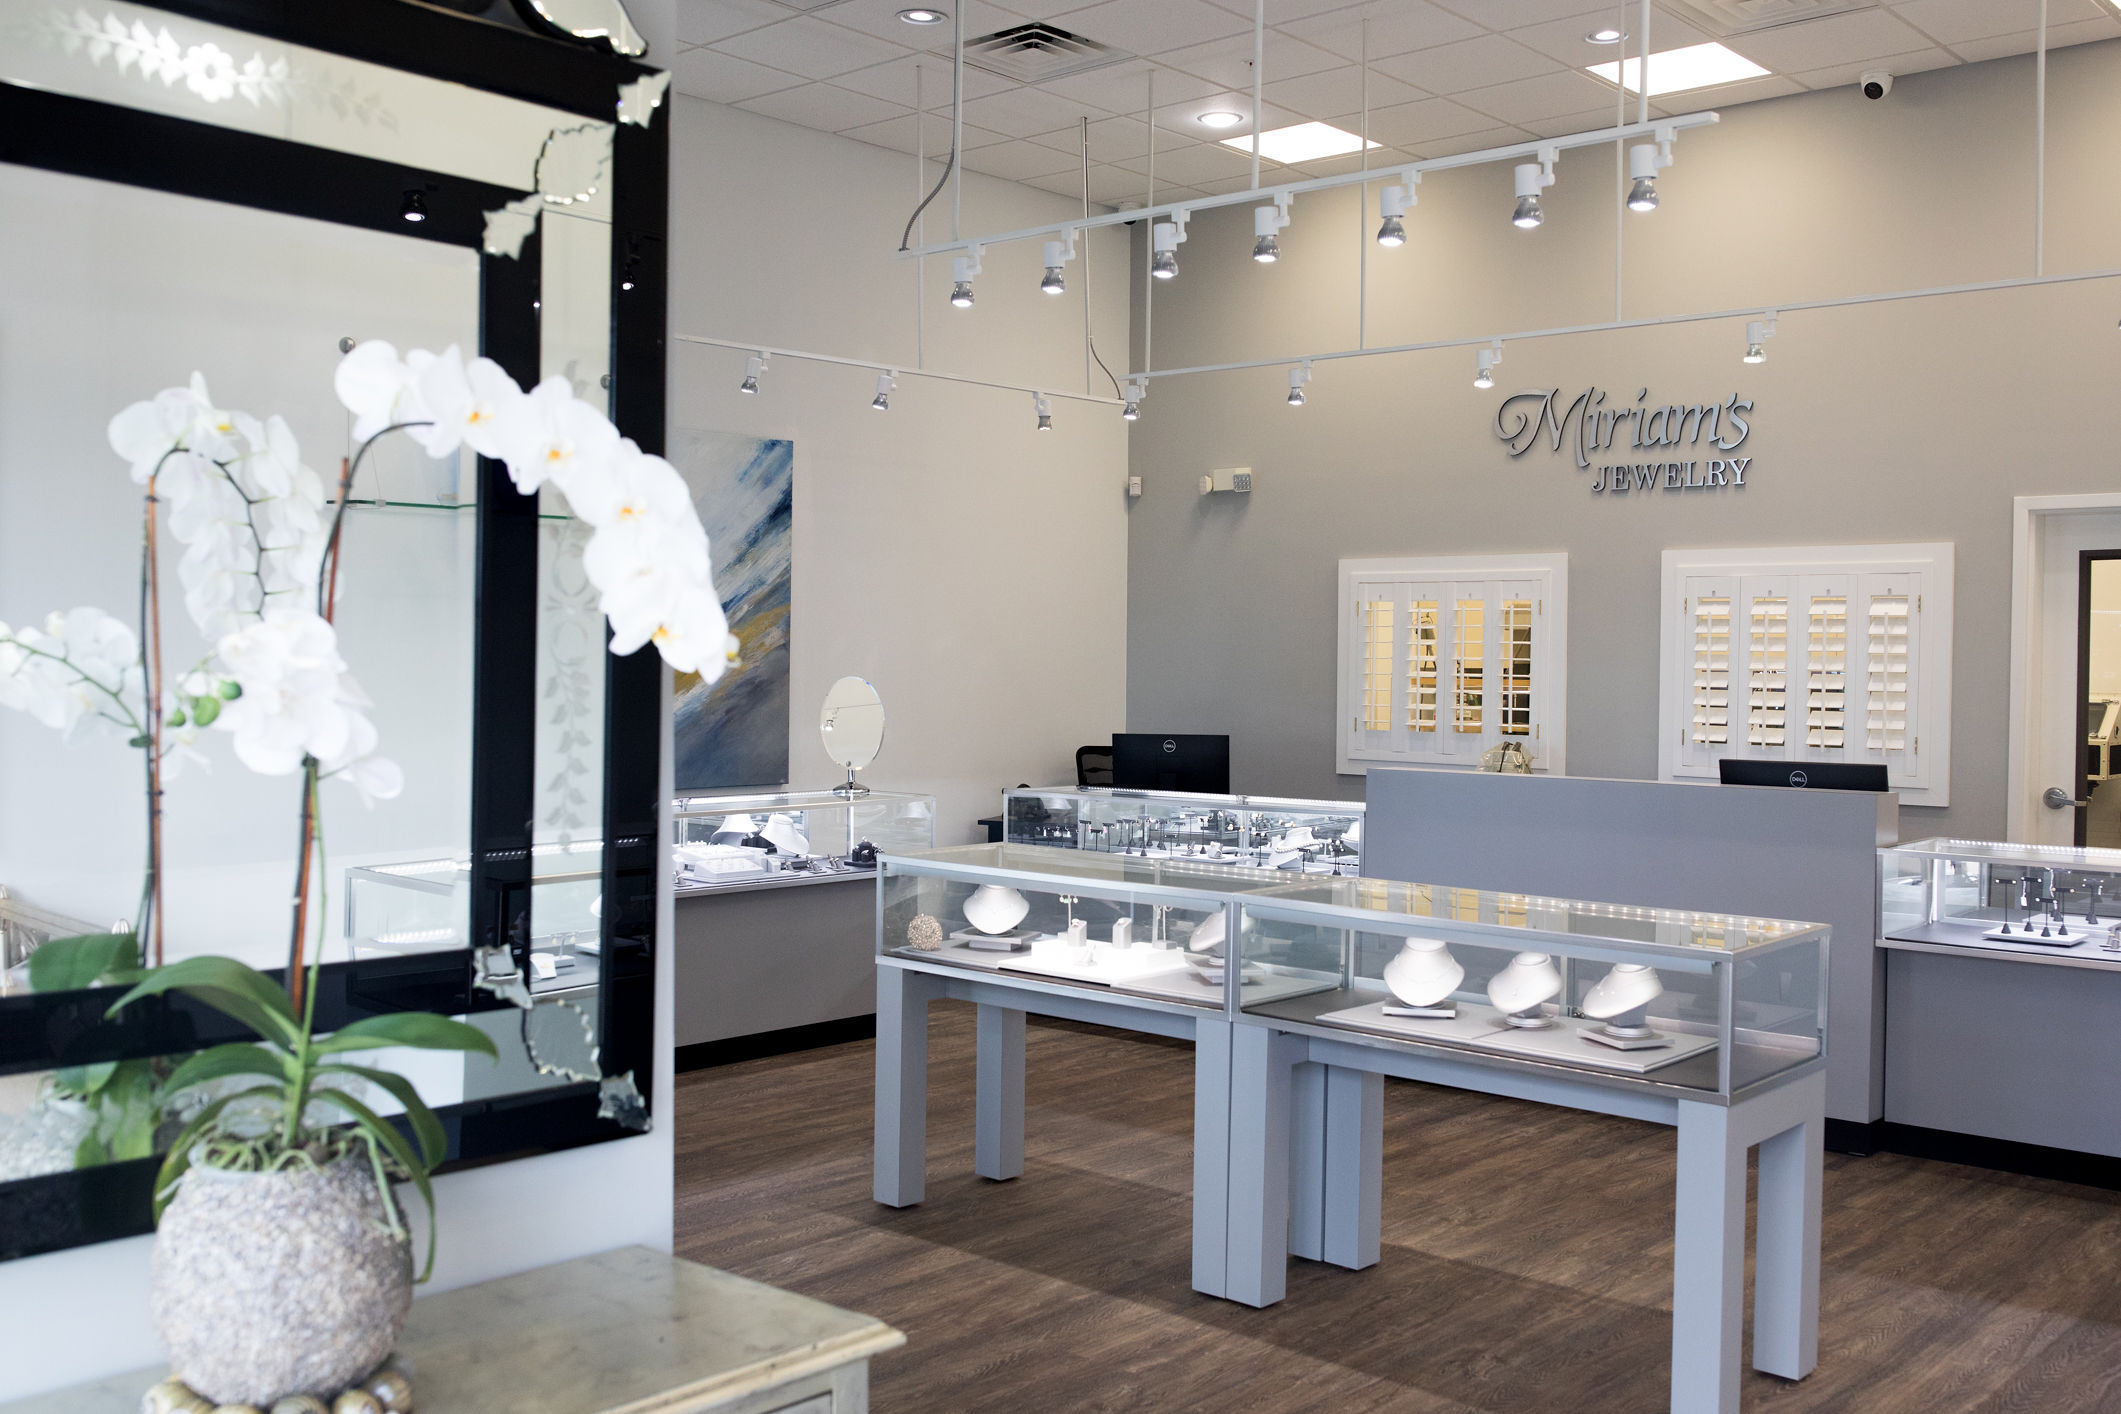 10 Reasons to Buy Jewelry from a Family-Owned Business